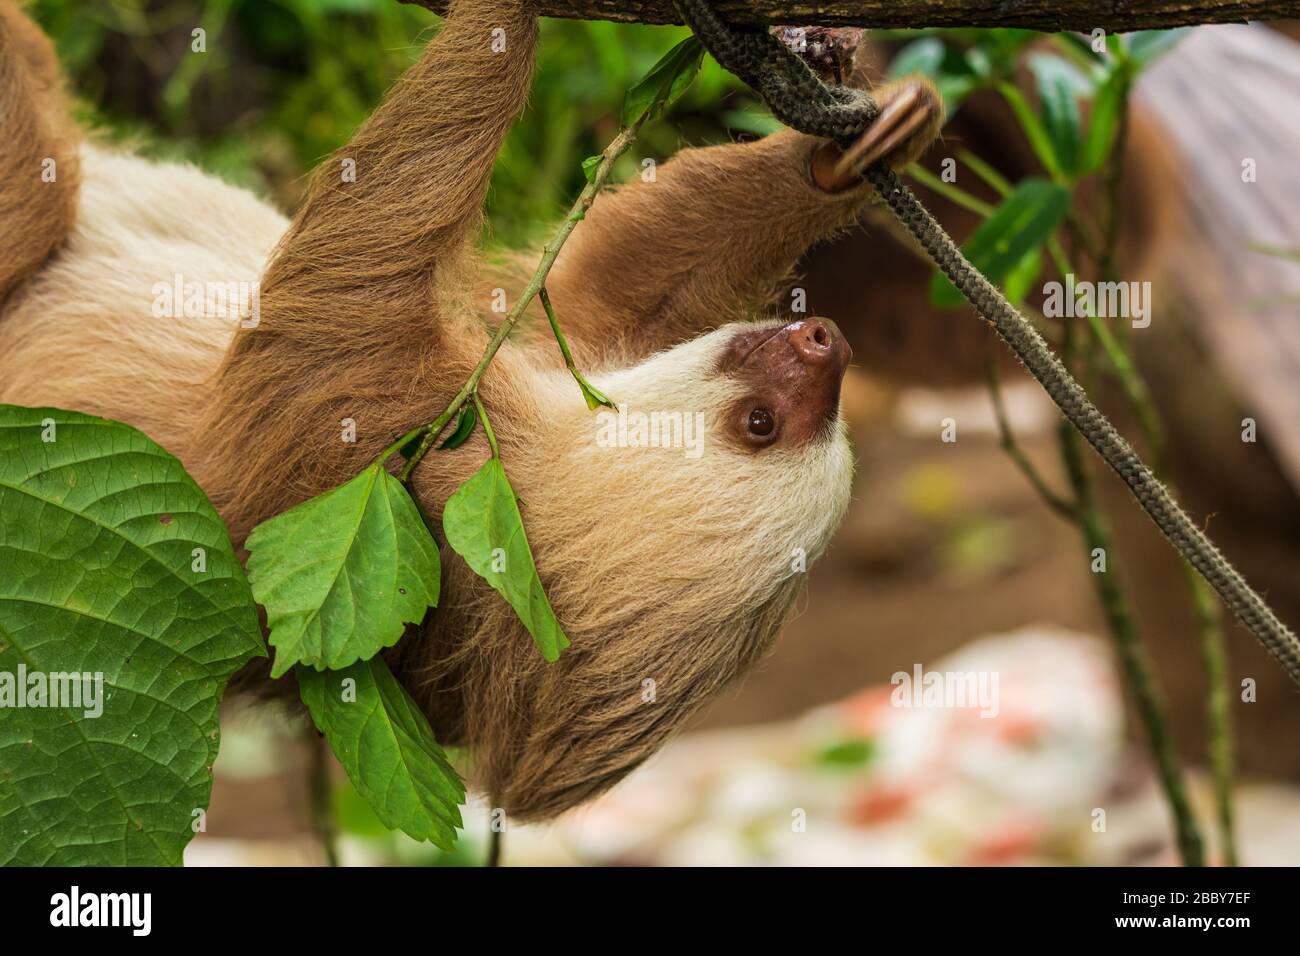 Two-toed Sloth (Choloepus hoffmanni) climbing on a branch at the Jaguar Rescue Center in Puerto Viejo de Talamanca in Limon Province, Costa Rica. Stock Photo